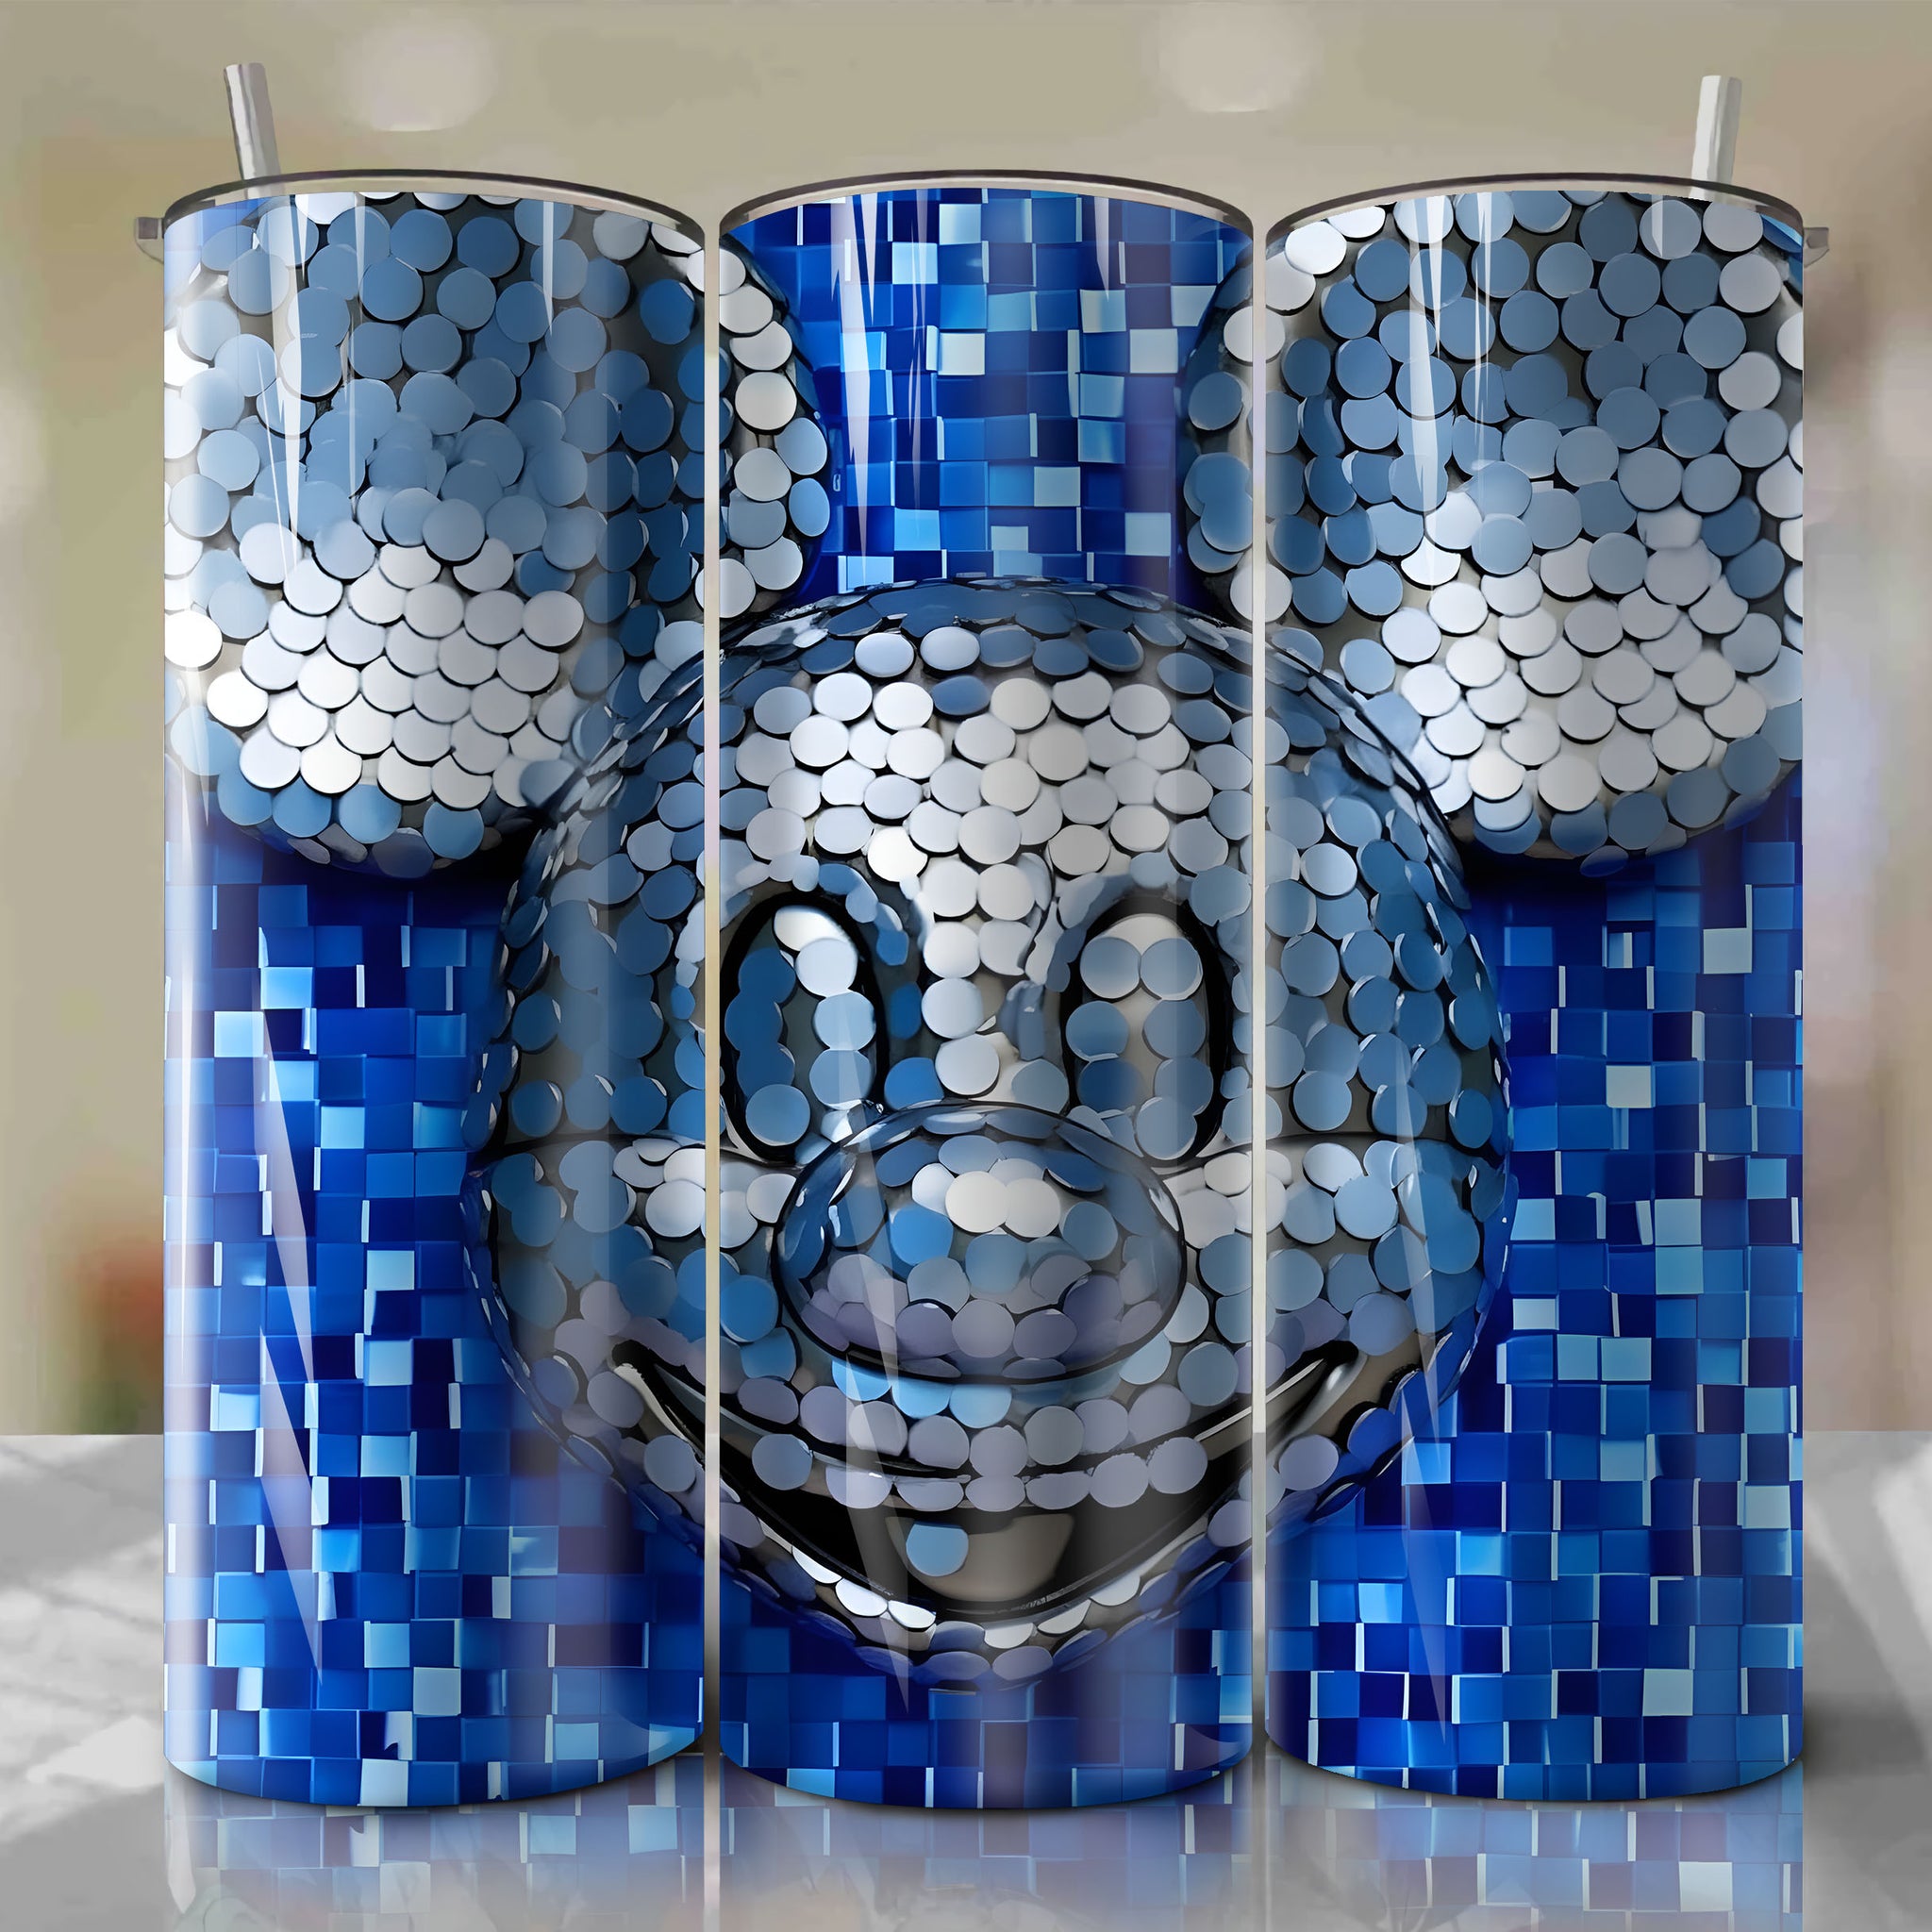 Watercolor Mickey Mouse Face 3D Bling Graphic - Digital Download for Sublimation Printing